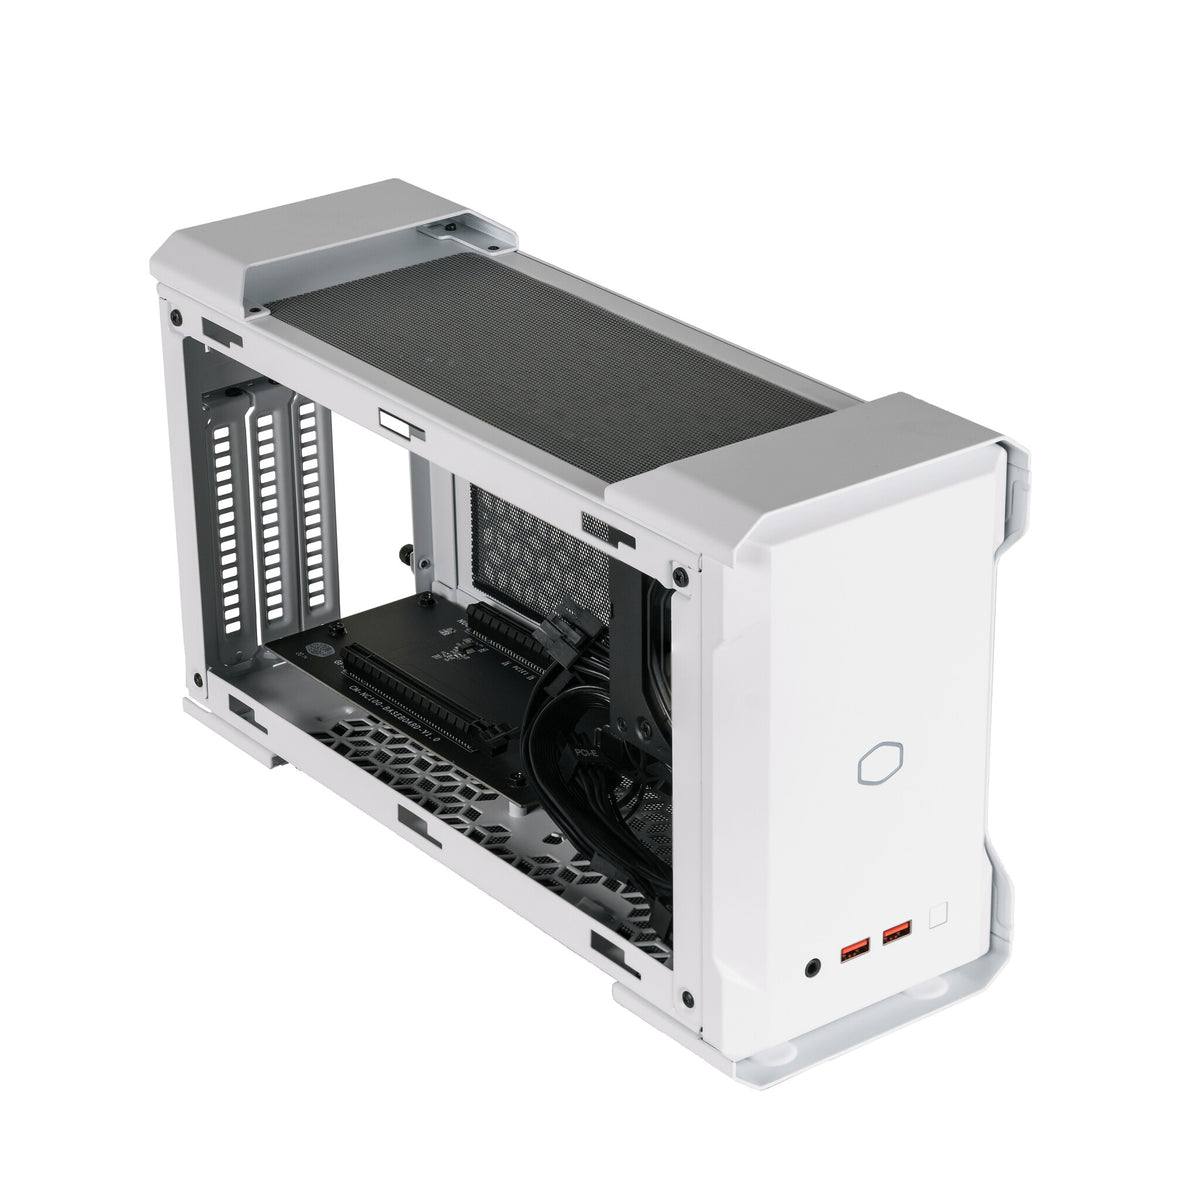 Cooler Master MasterCase NC100 - Small Form Factor PC Case in White